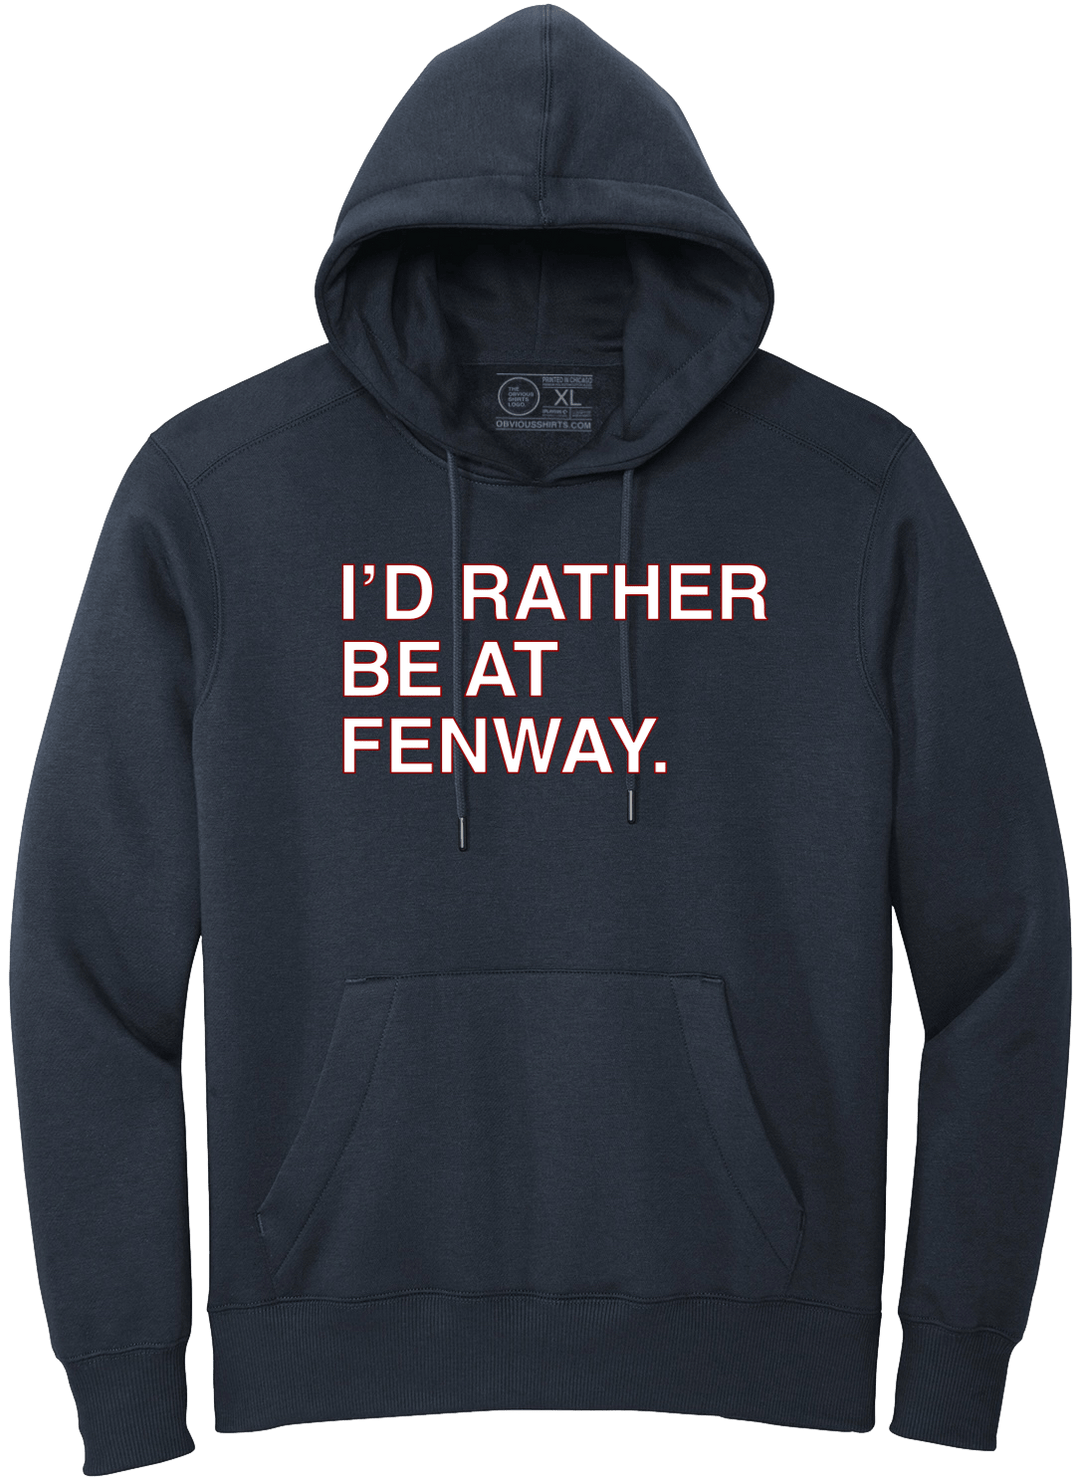 I'D RATHER BE AT FENWAY. (HOODED SWEATSHIRT) - OBVIOUS SHIRTS